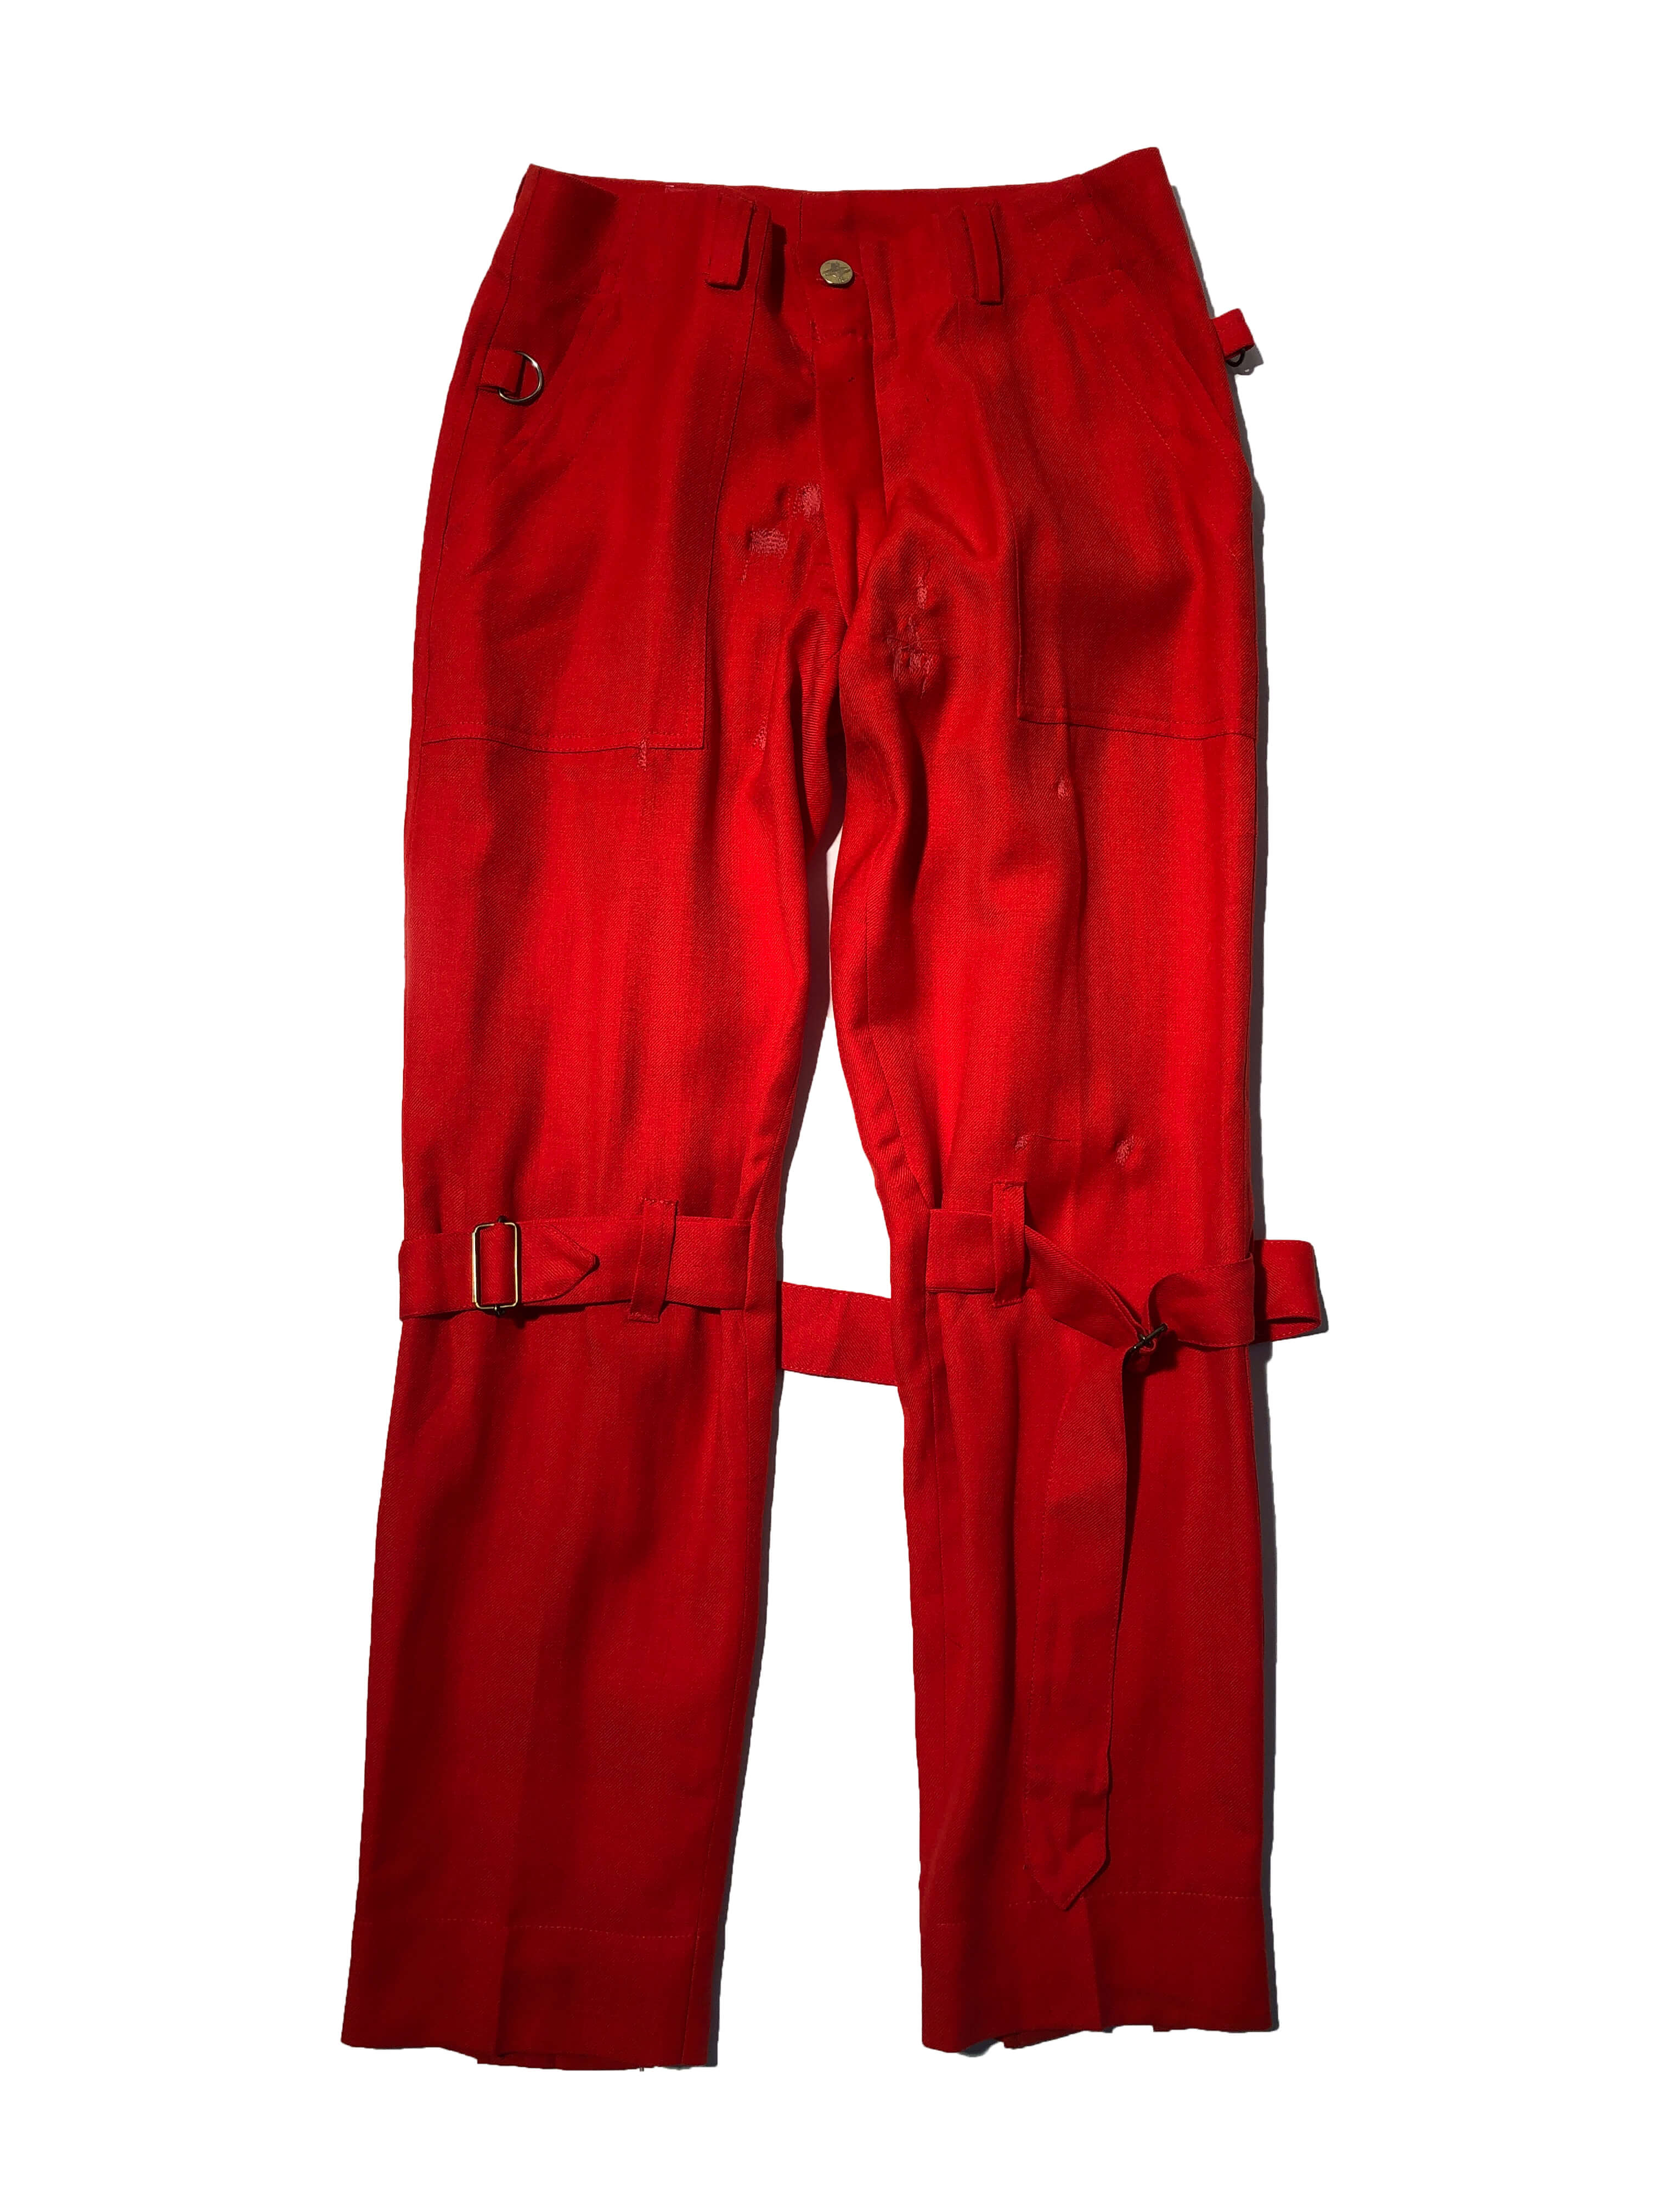 (only rent) VIVIENNE WESTWOOD early 90s red bondage pants